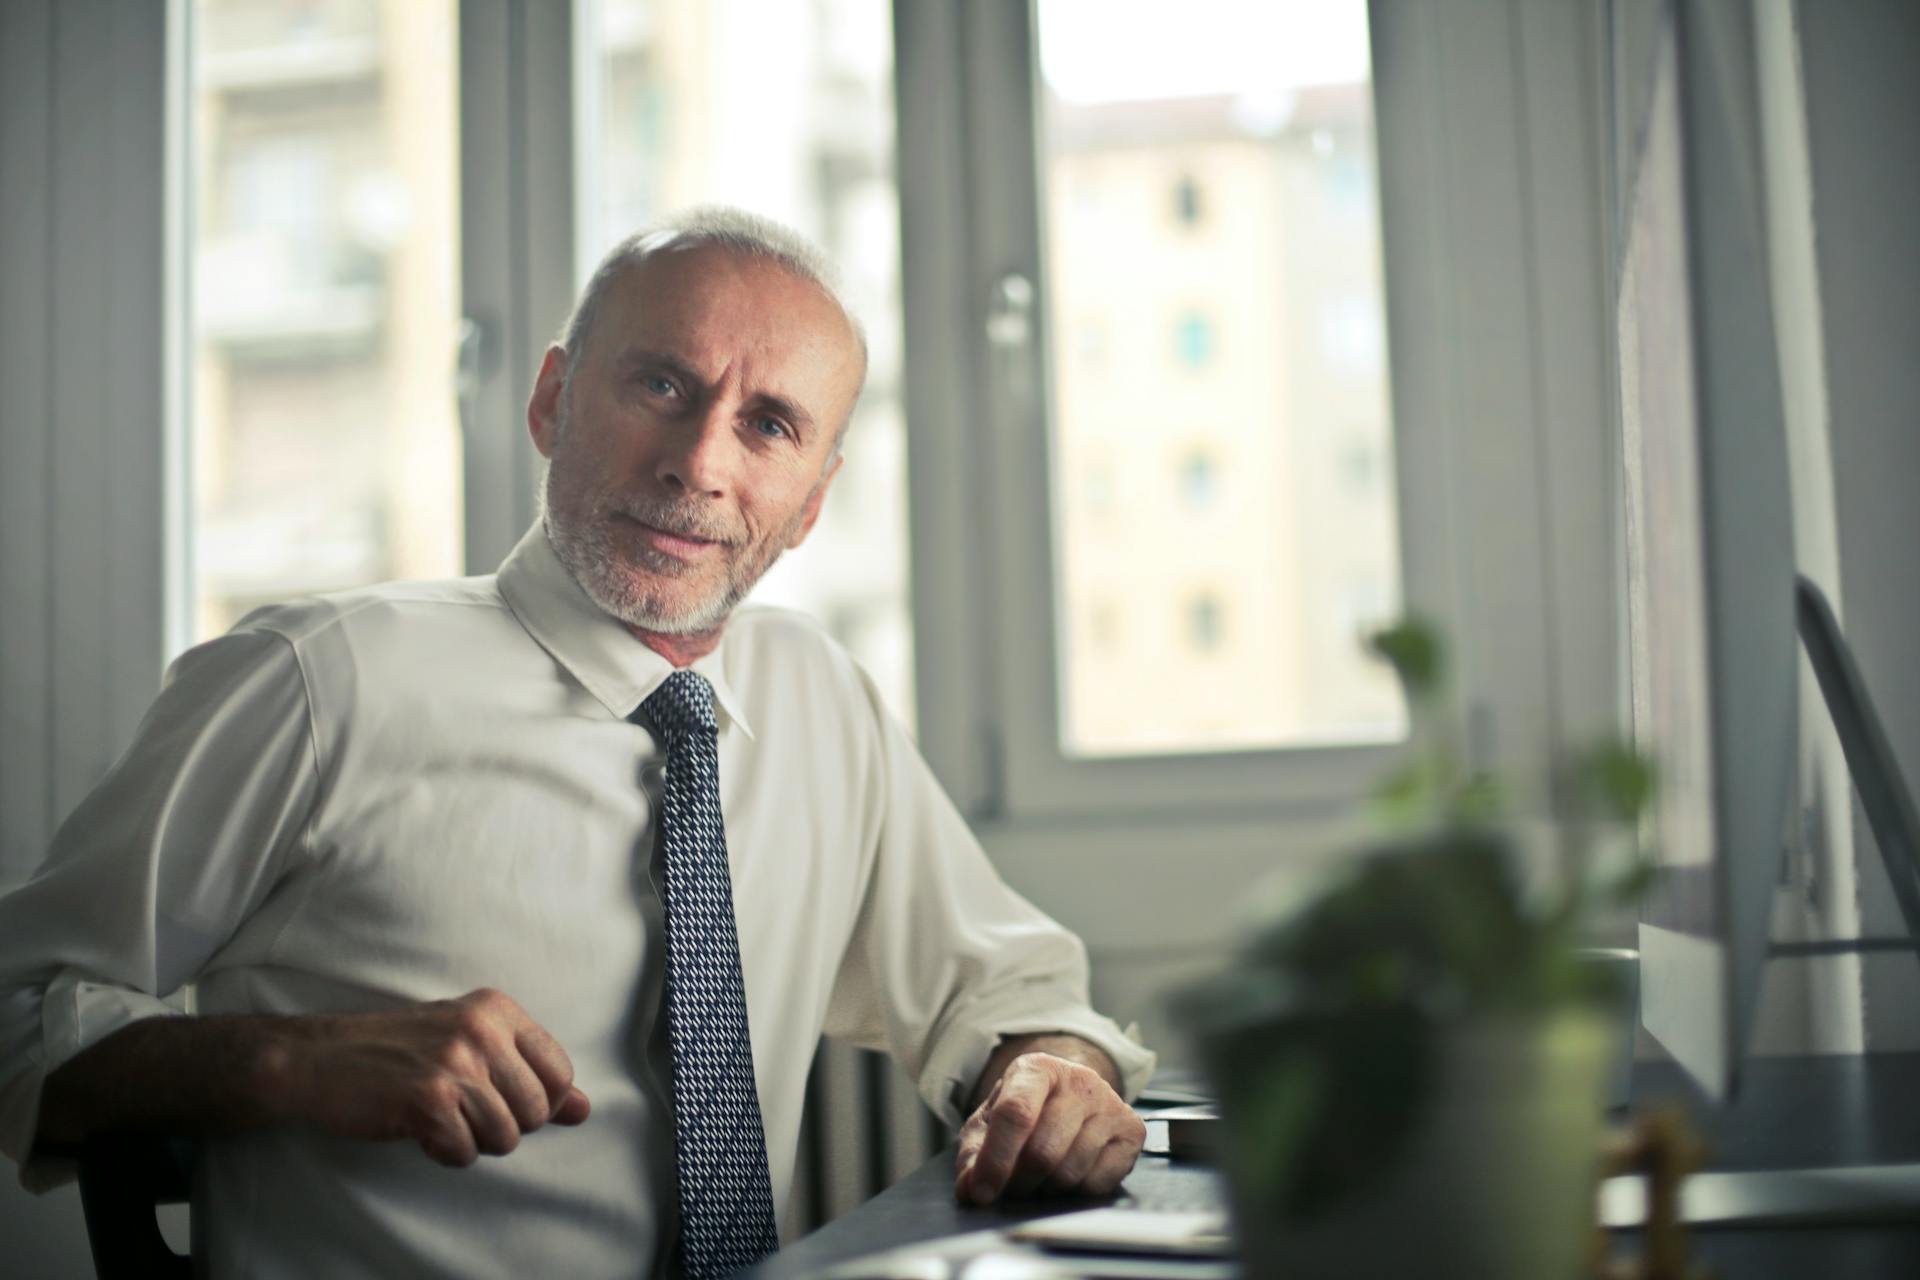 A middle-aged man sitting at his desk | Source: Pexels